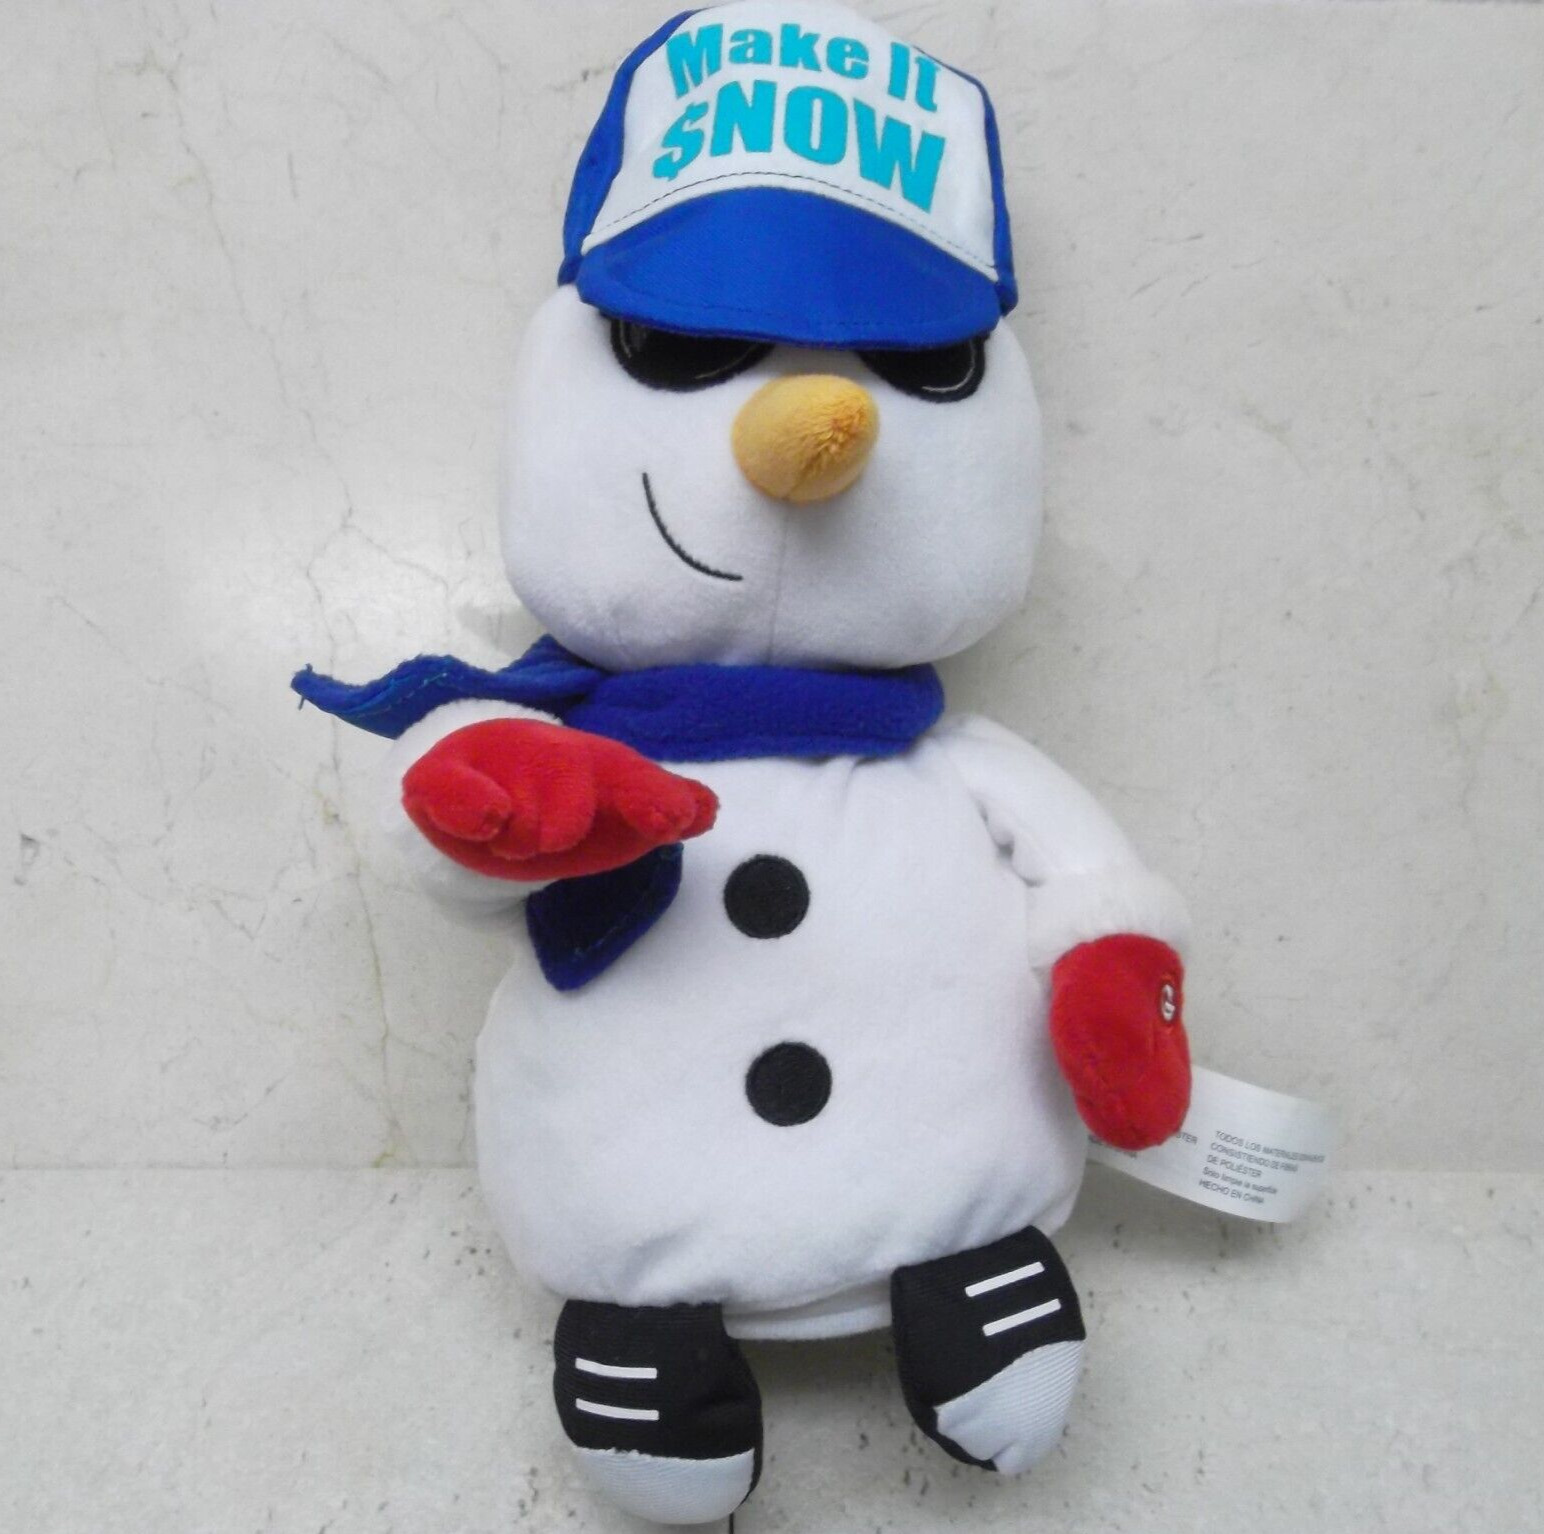 Gemmy Rapping Snowman Dances & Sings Rapper's Delight Hip Hop Animated Christmas